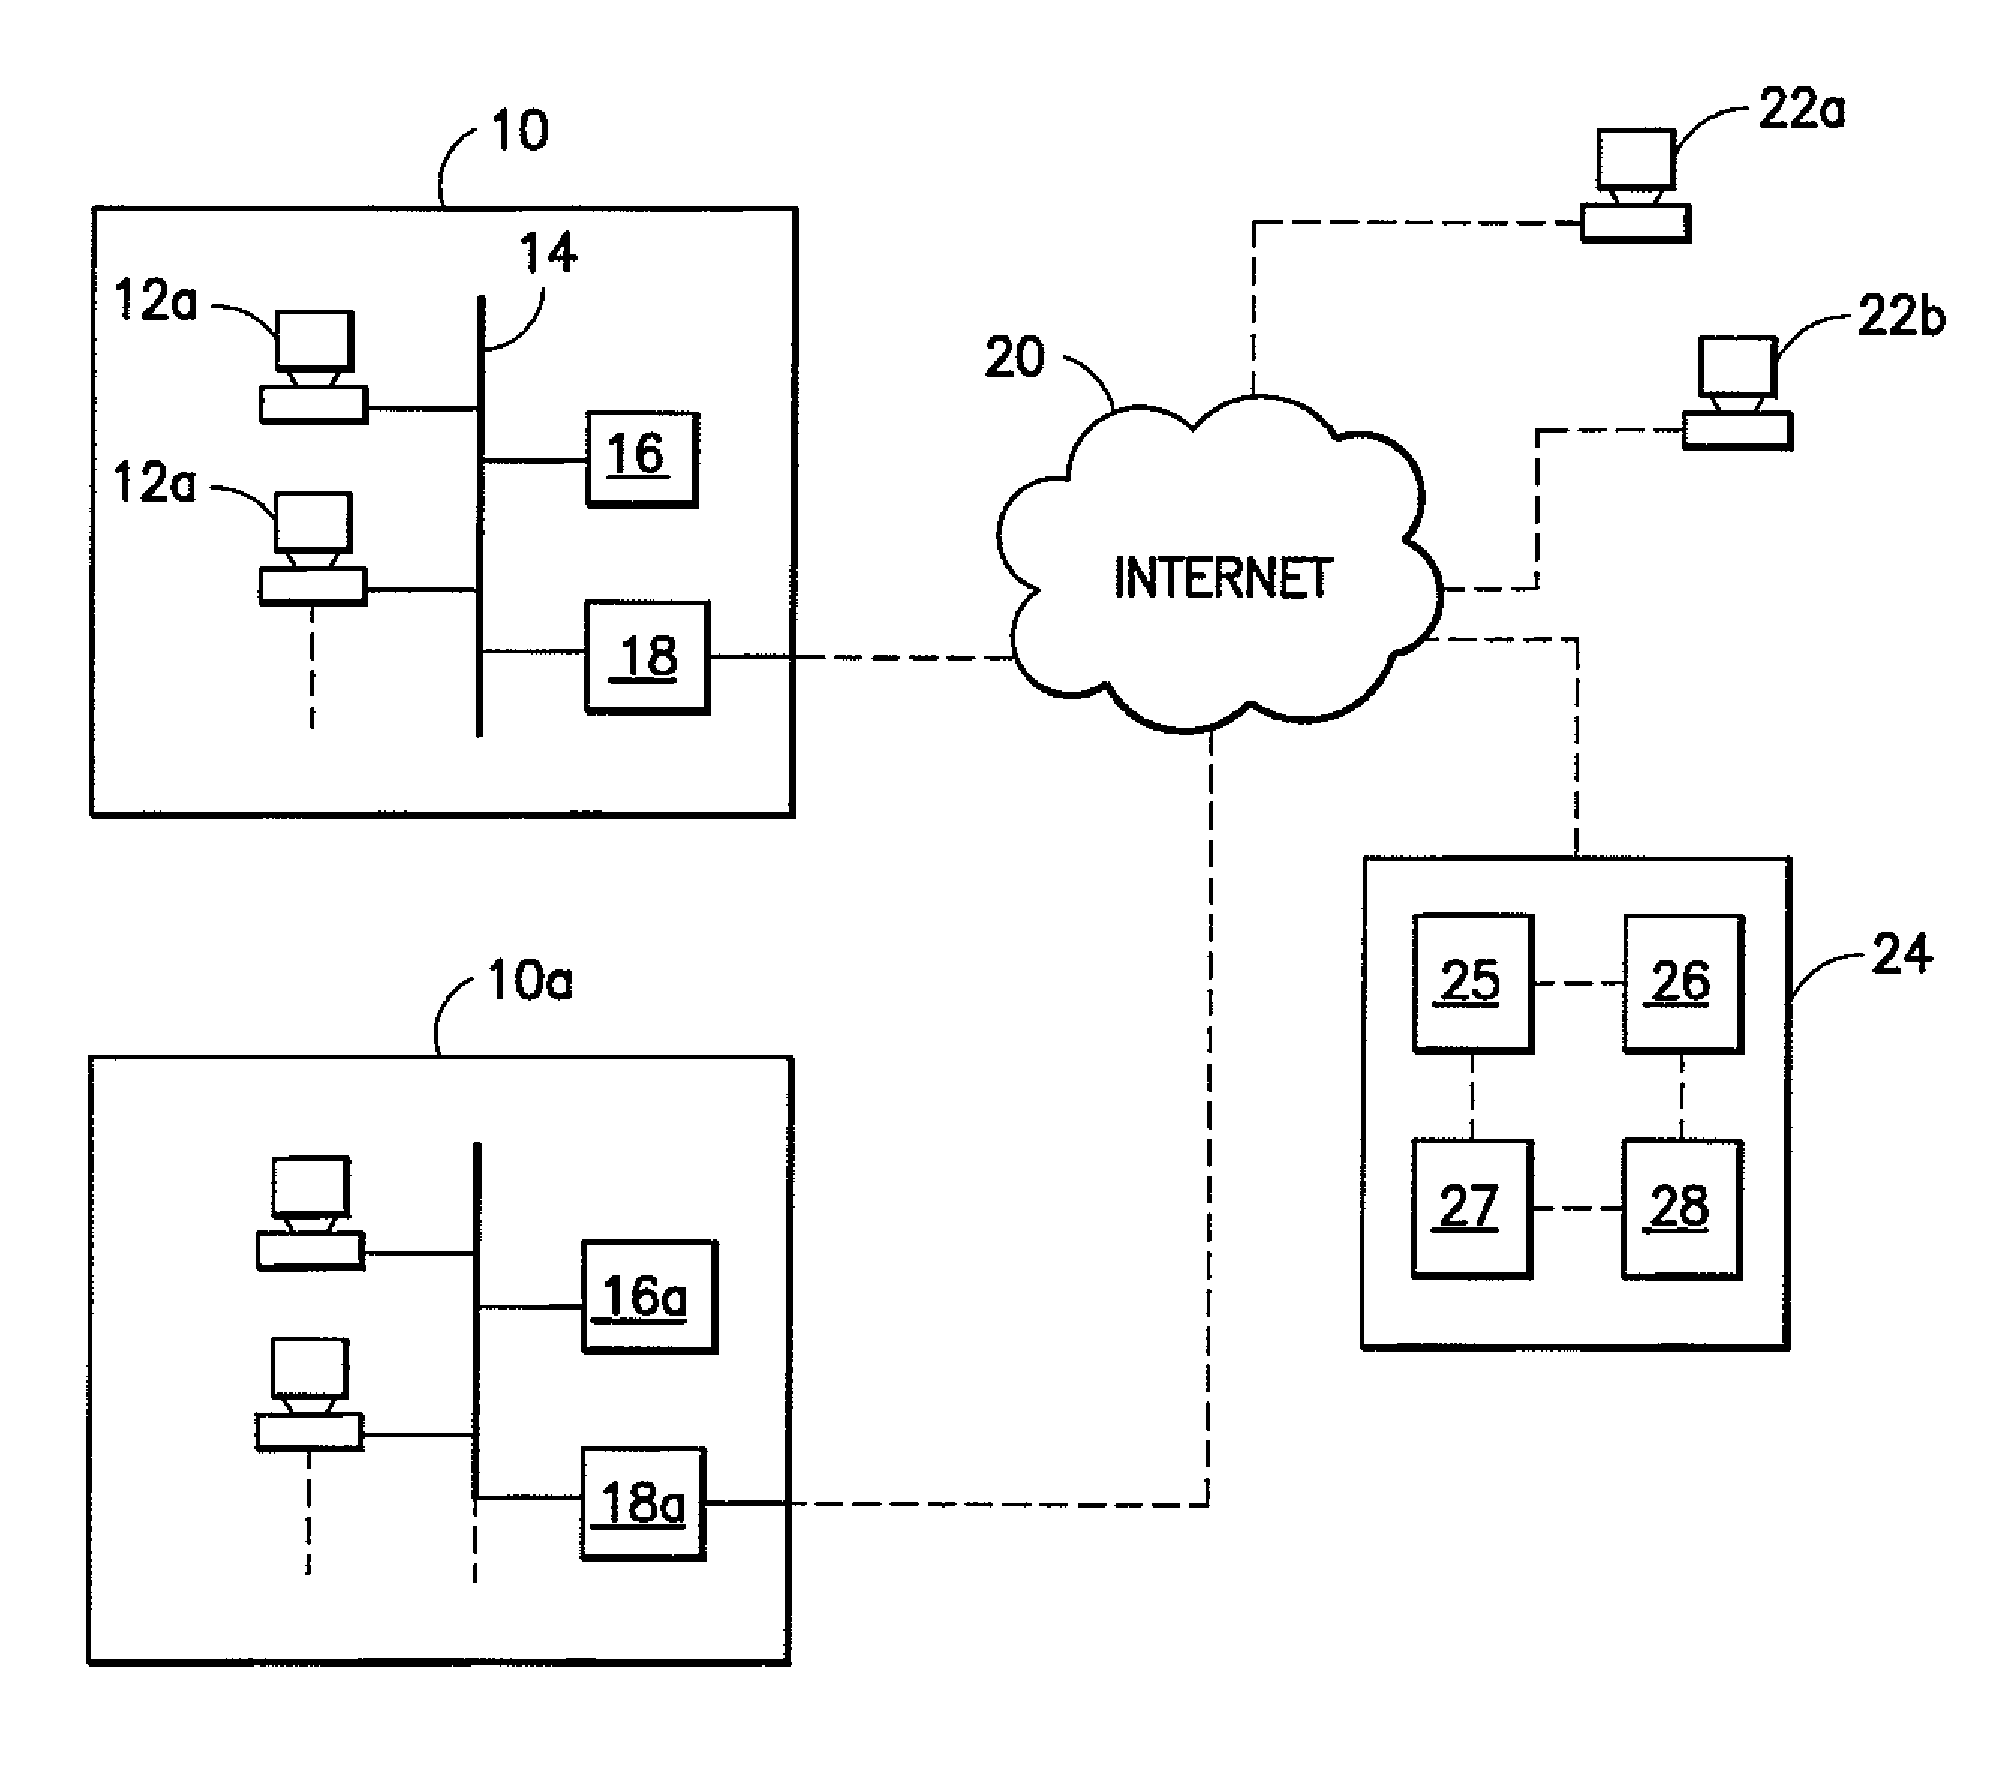 Computerized method and system for managing the exchange and distribution of confidential documents